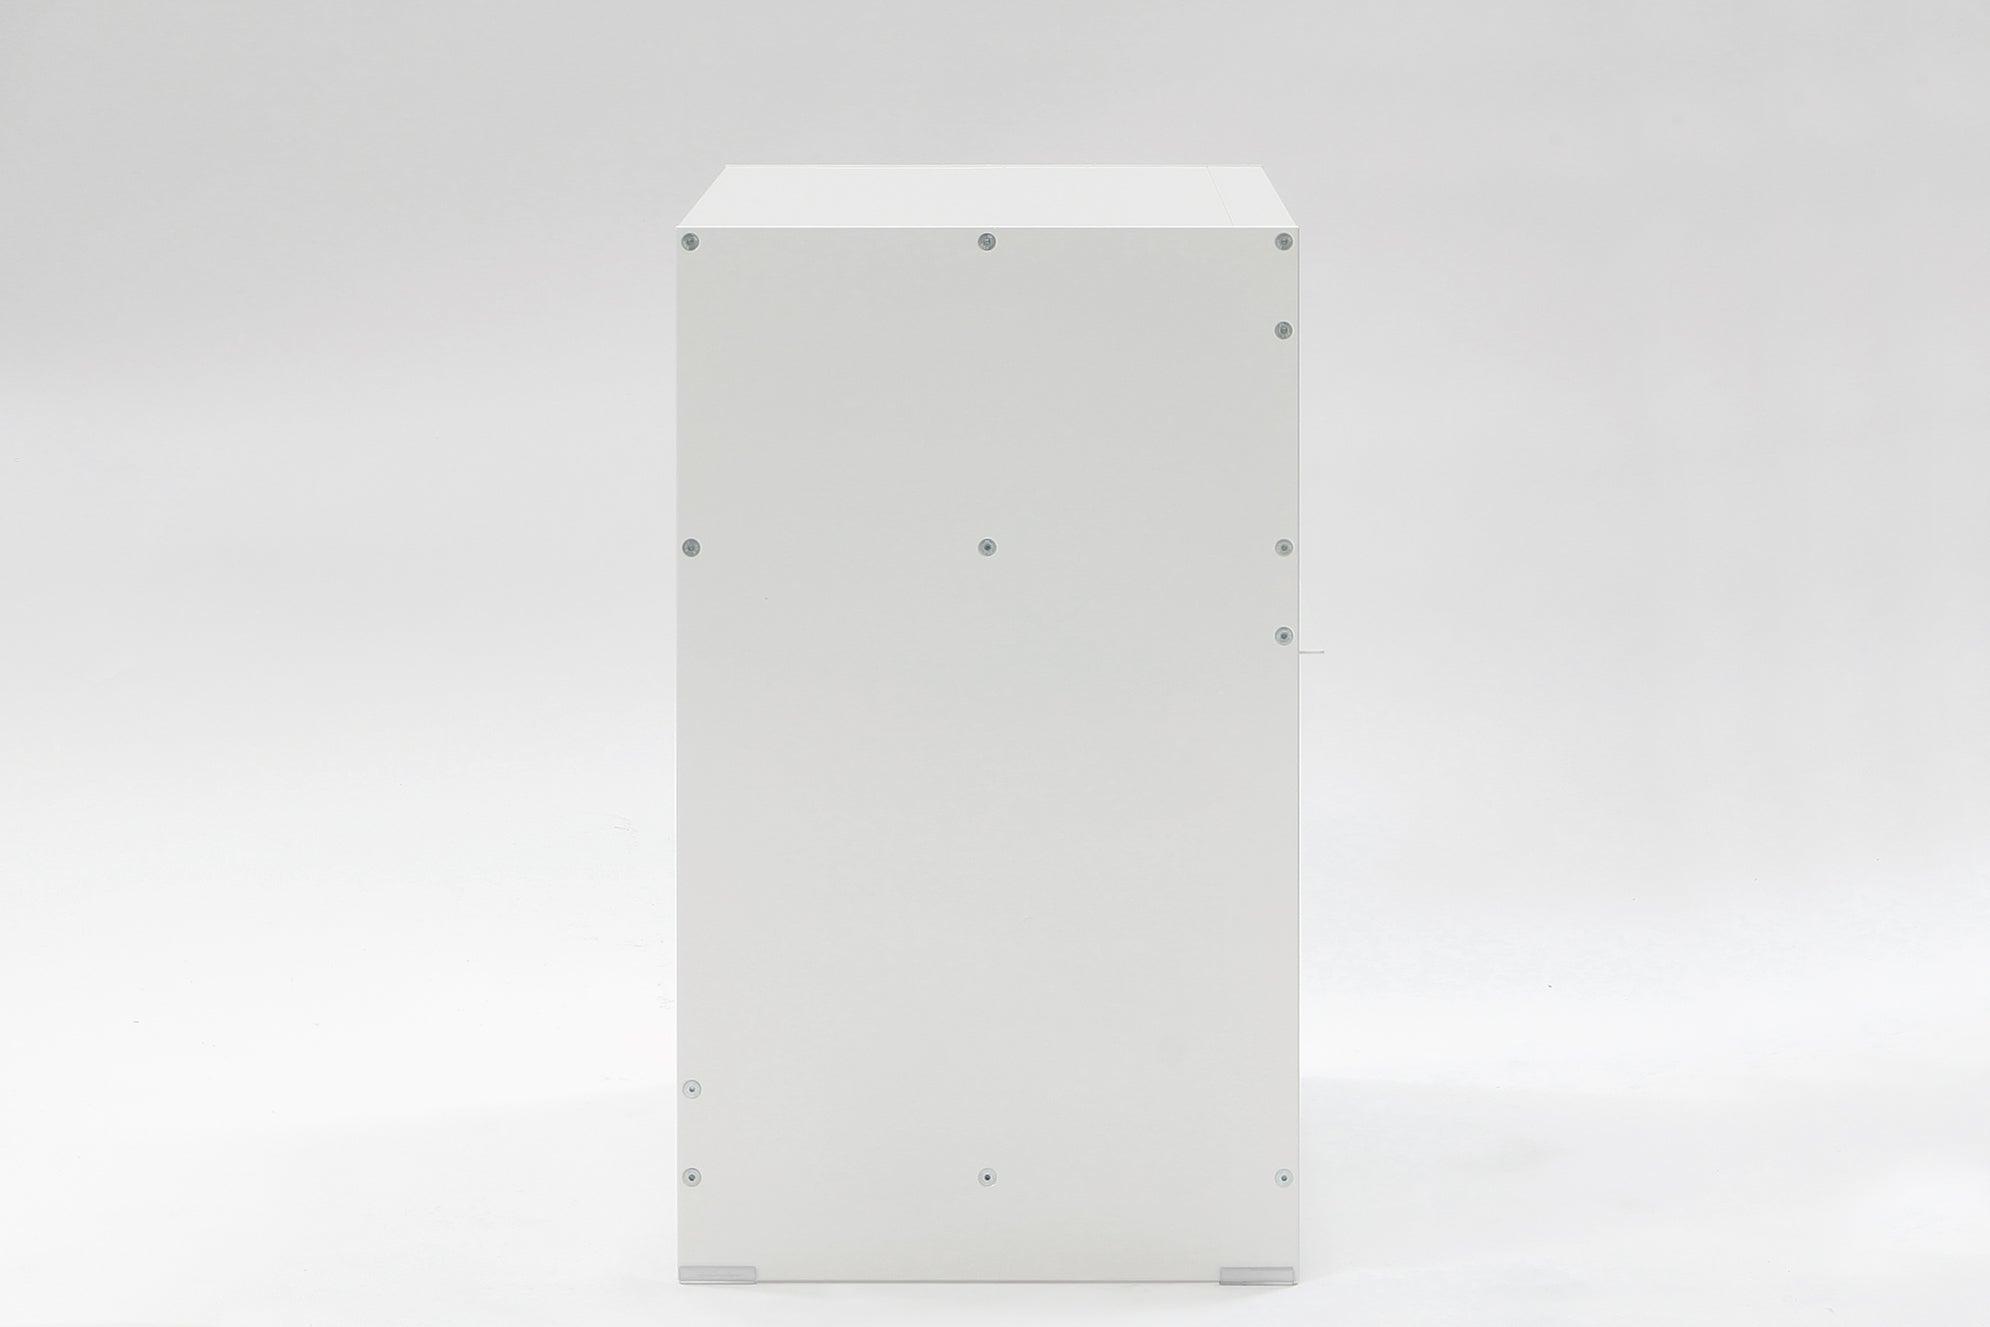 ON&ON H2 aluminium side table, side view in white